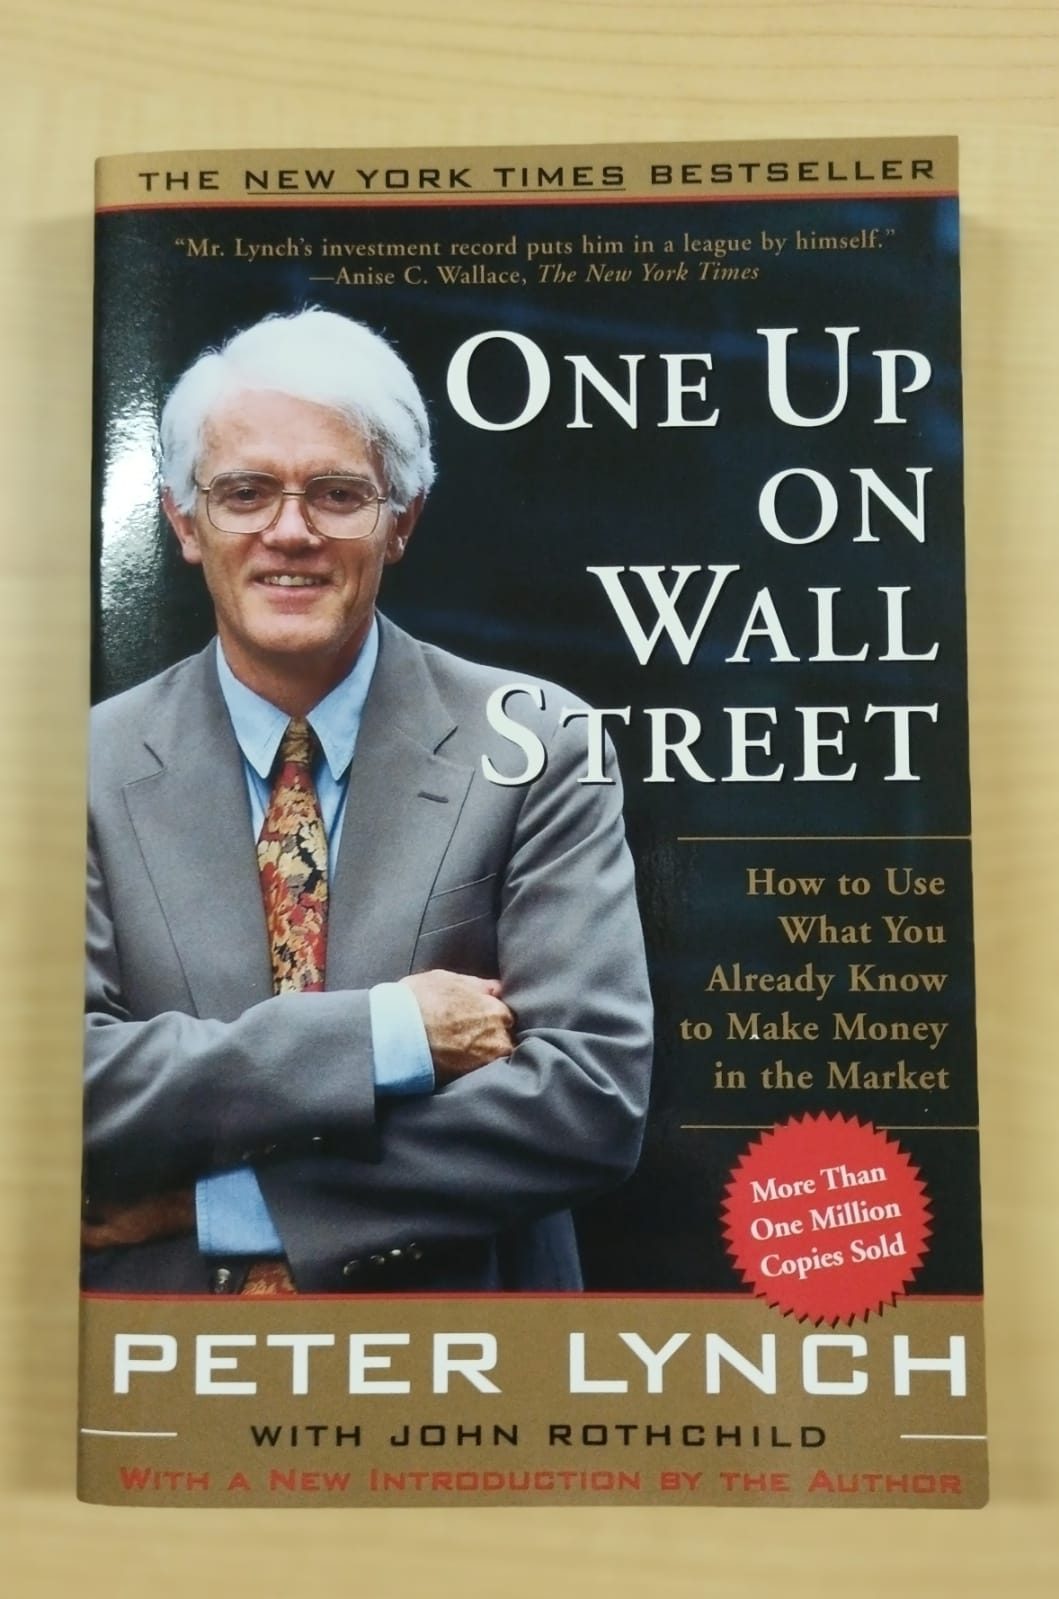 One up on wall street: how to use what you already know to make money in the market